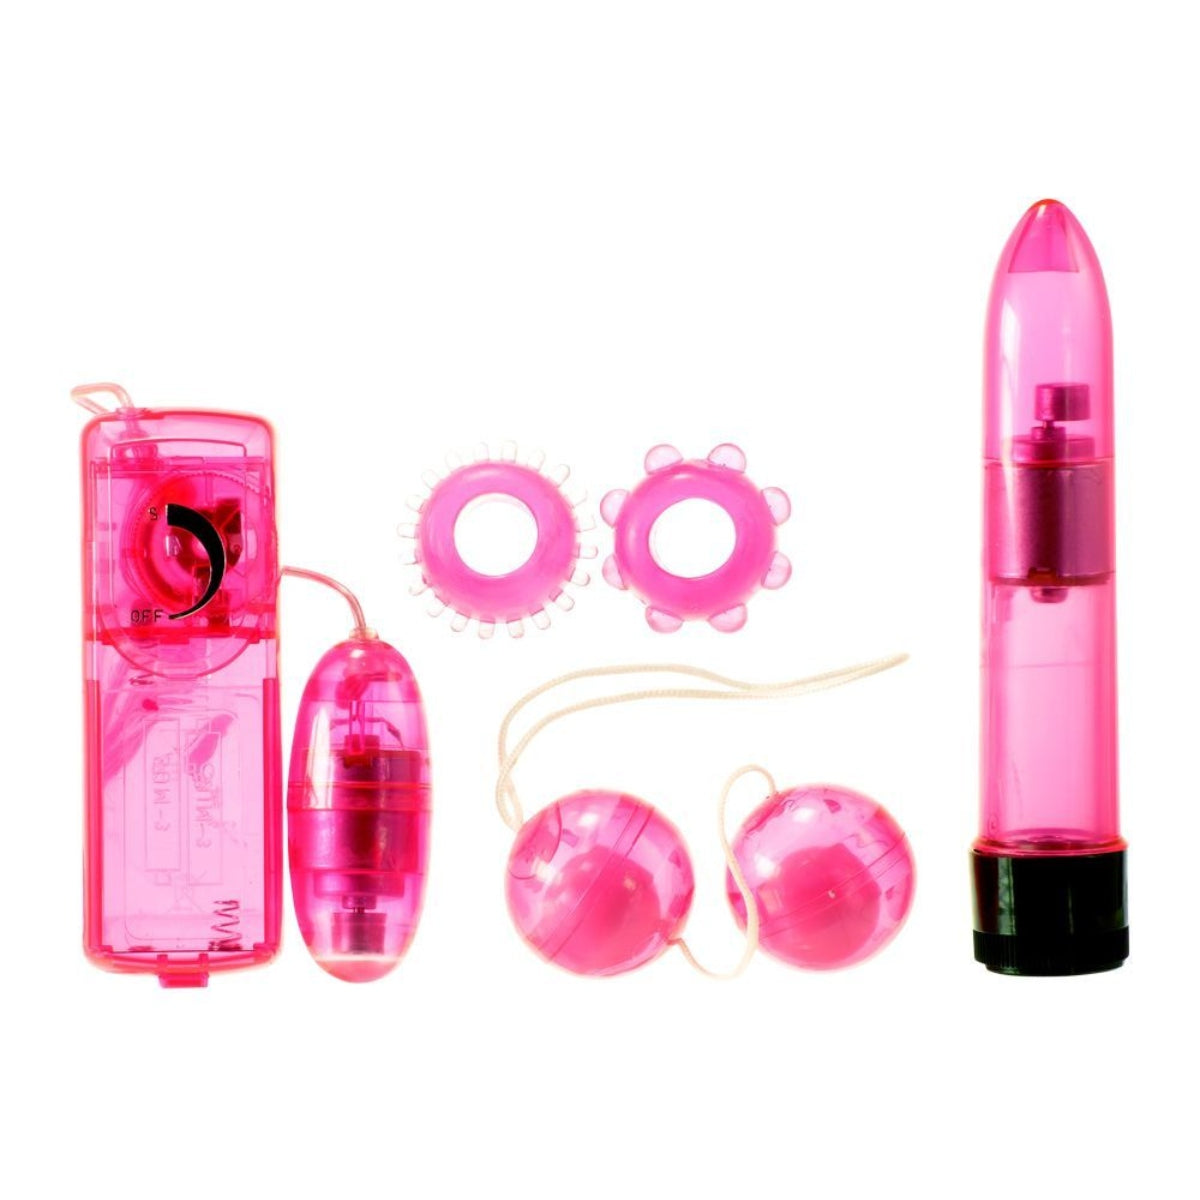 Me You Us Classic Crystal Couples Sex Toy Kit Pink - Simply Pleasure